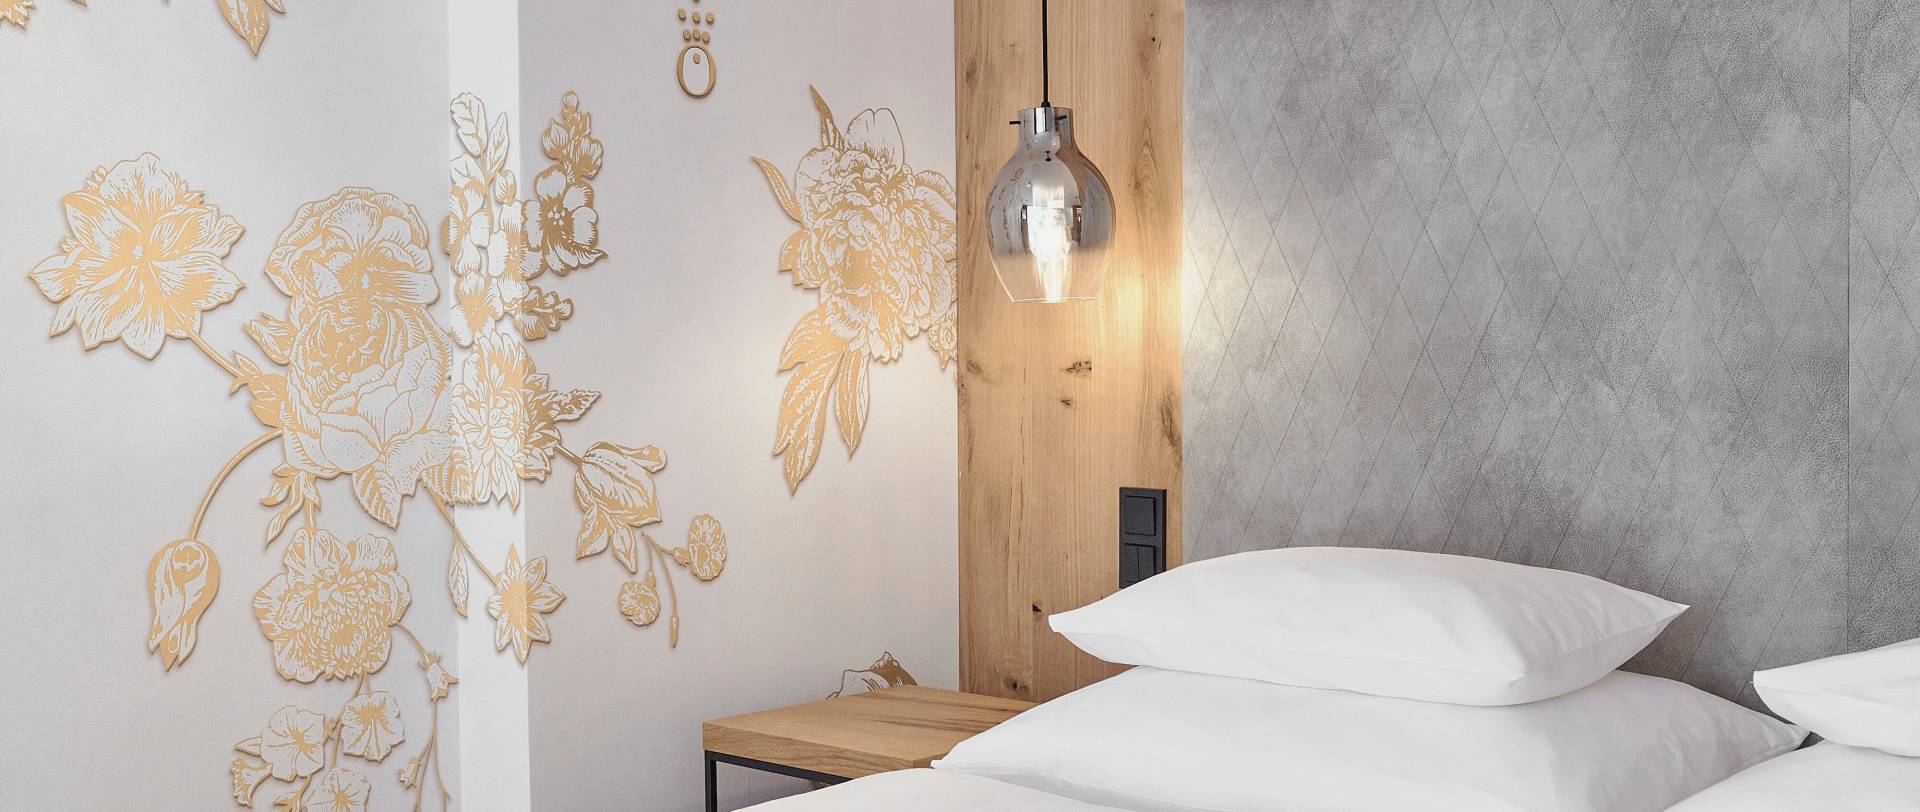 Bed in the hotel room of the HOCHKÖNIGIN with stylish lamps and noble wallpaper with golden flowers